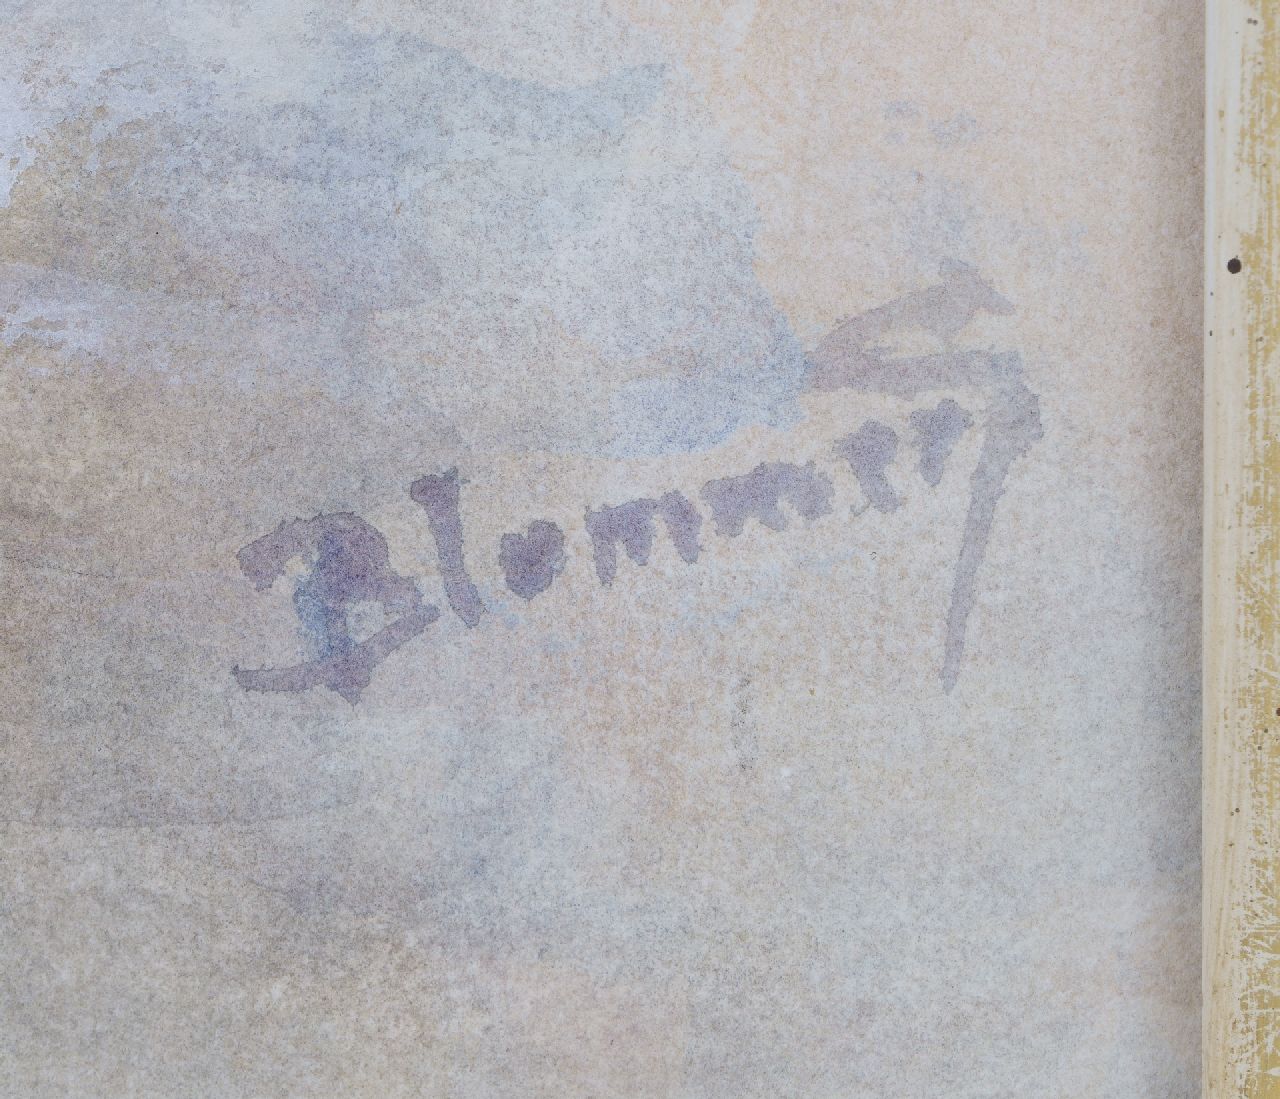 Bernard Blommers signatures The first steps